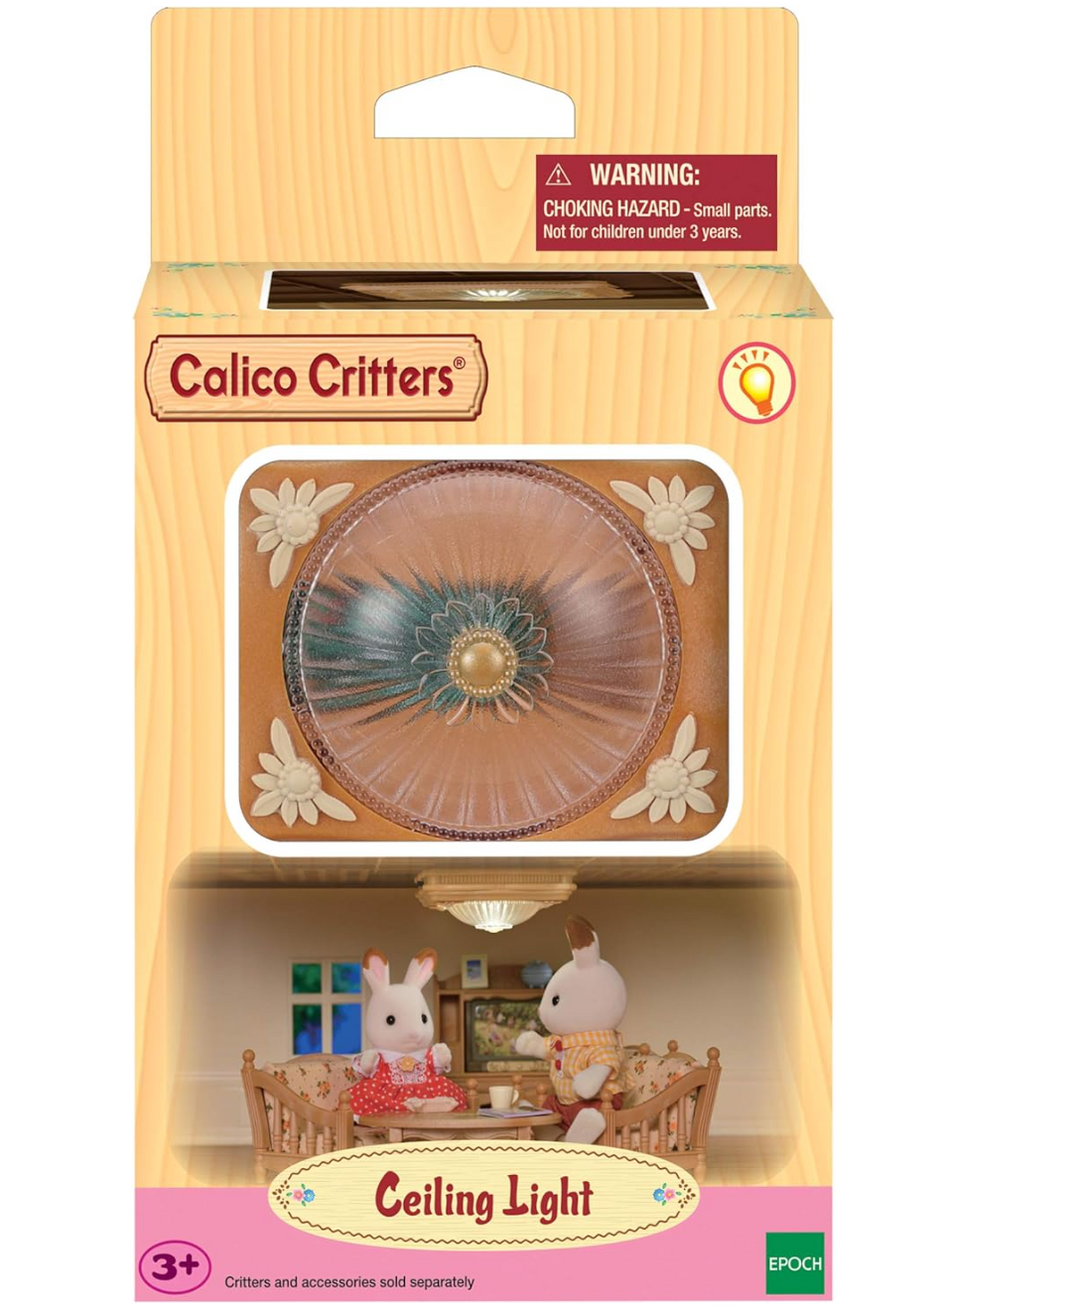 Calico Critters Ceiling Light